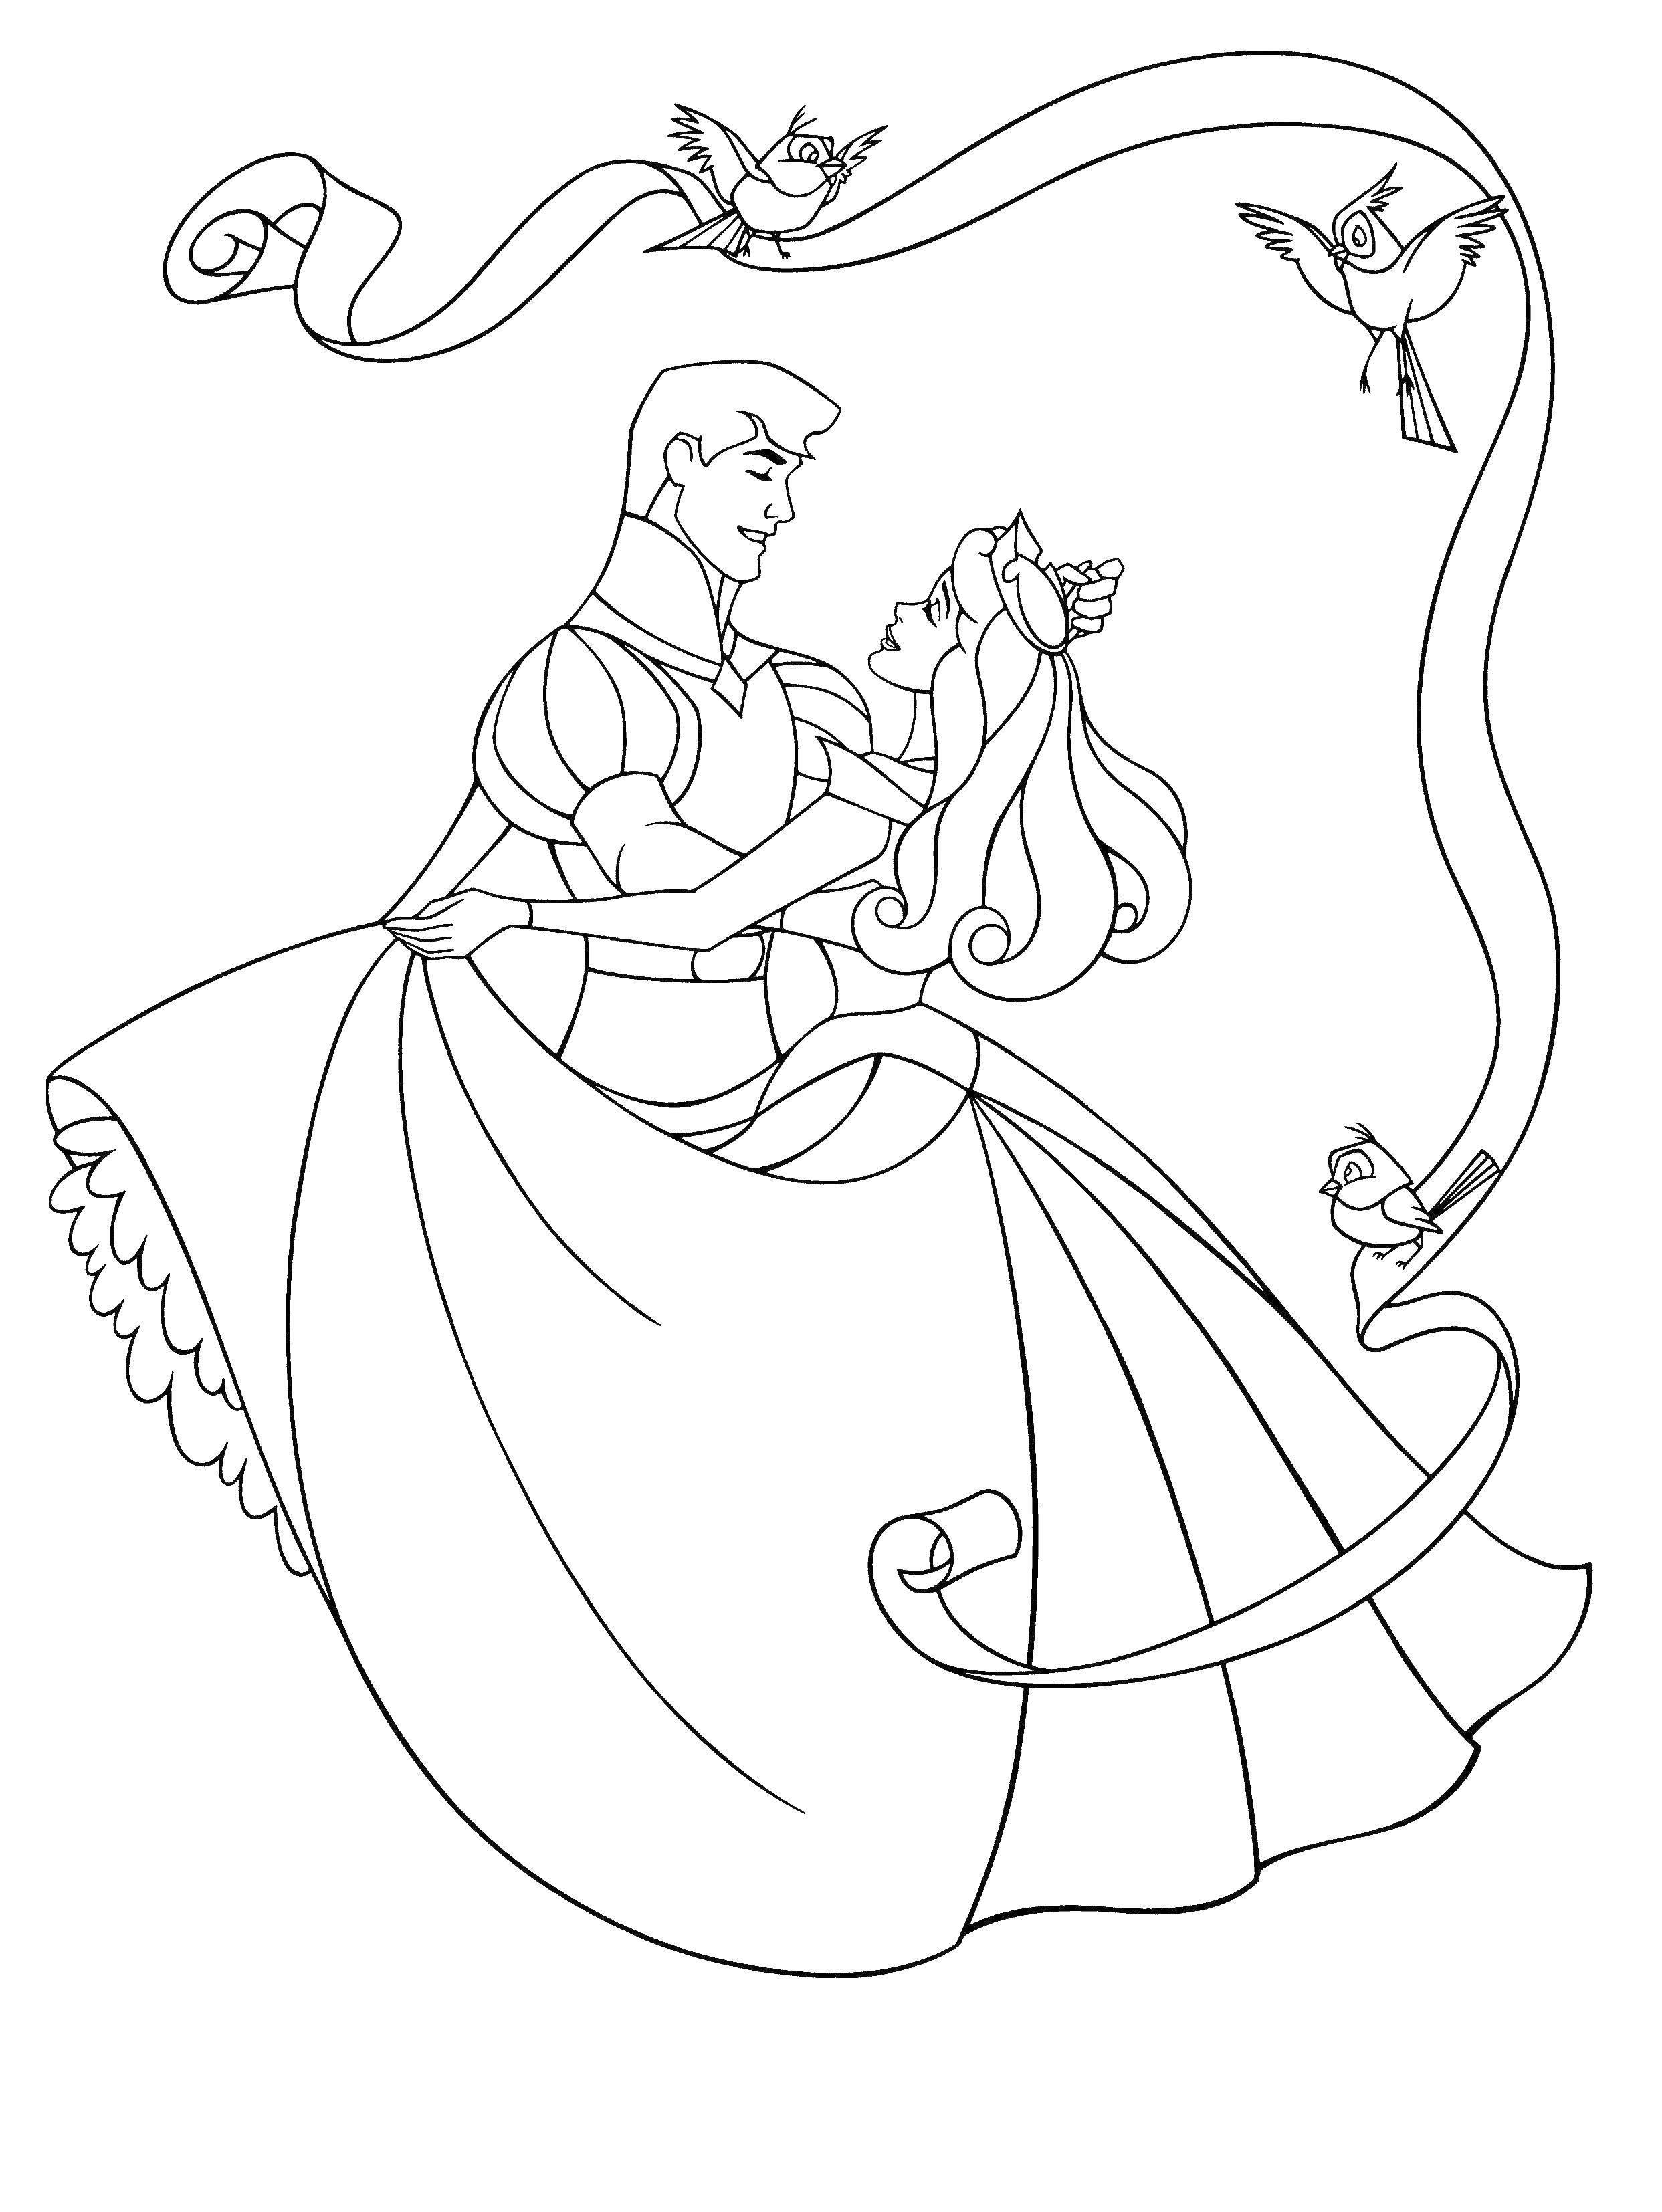 Coloring Aurora and Phillip. Category sleeping beauty. Tags:  Disney, Sleeping beauty.